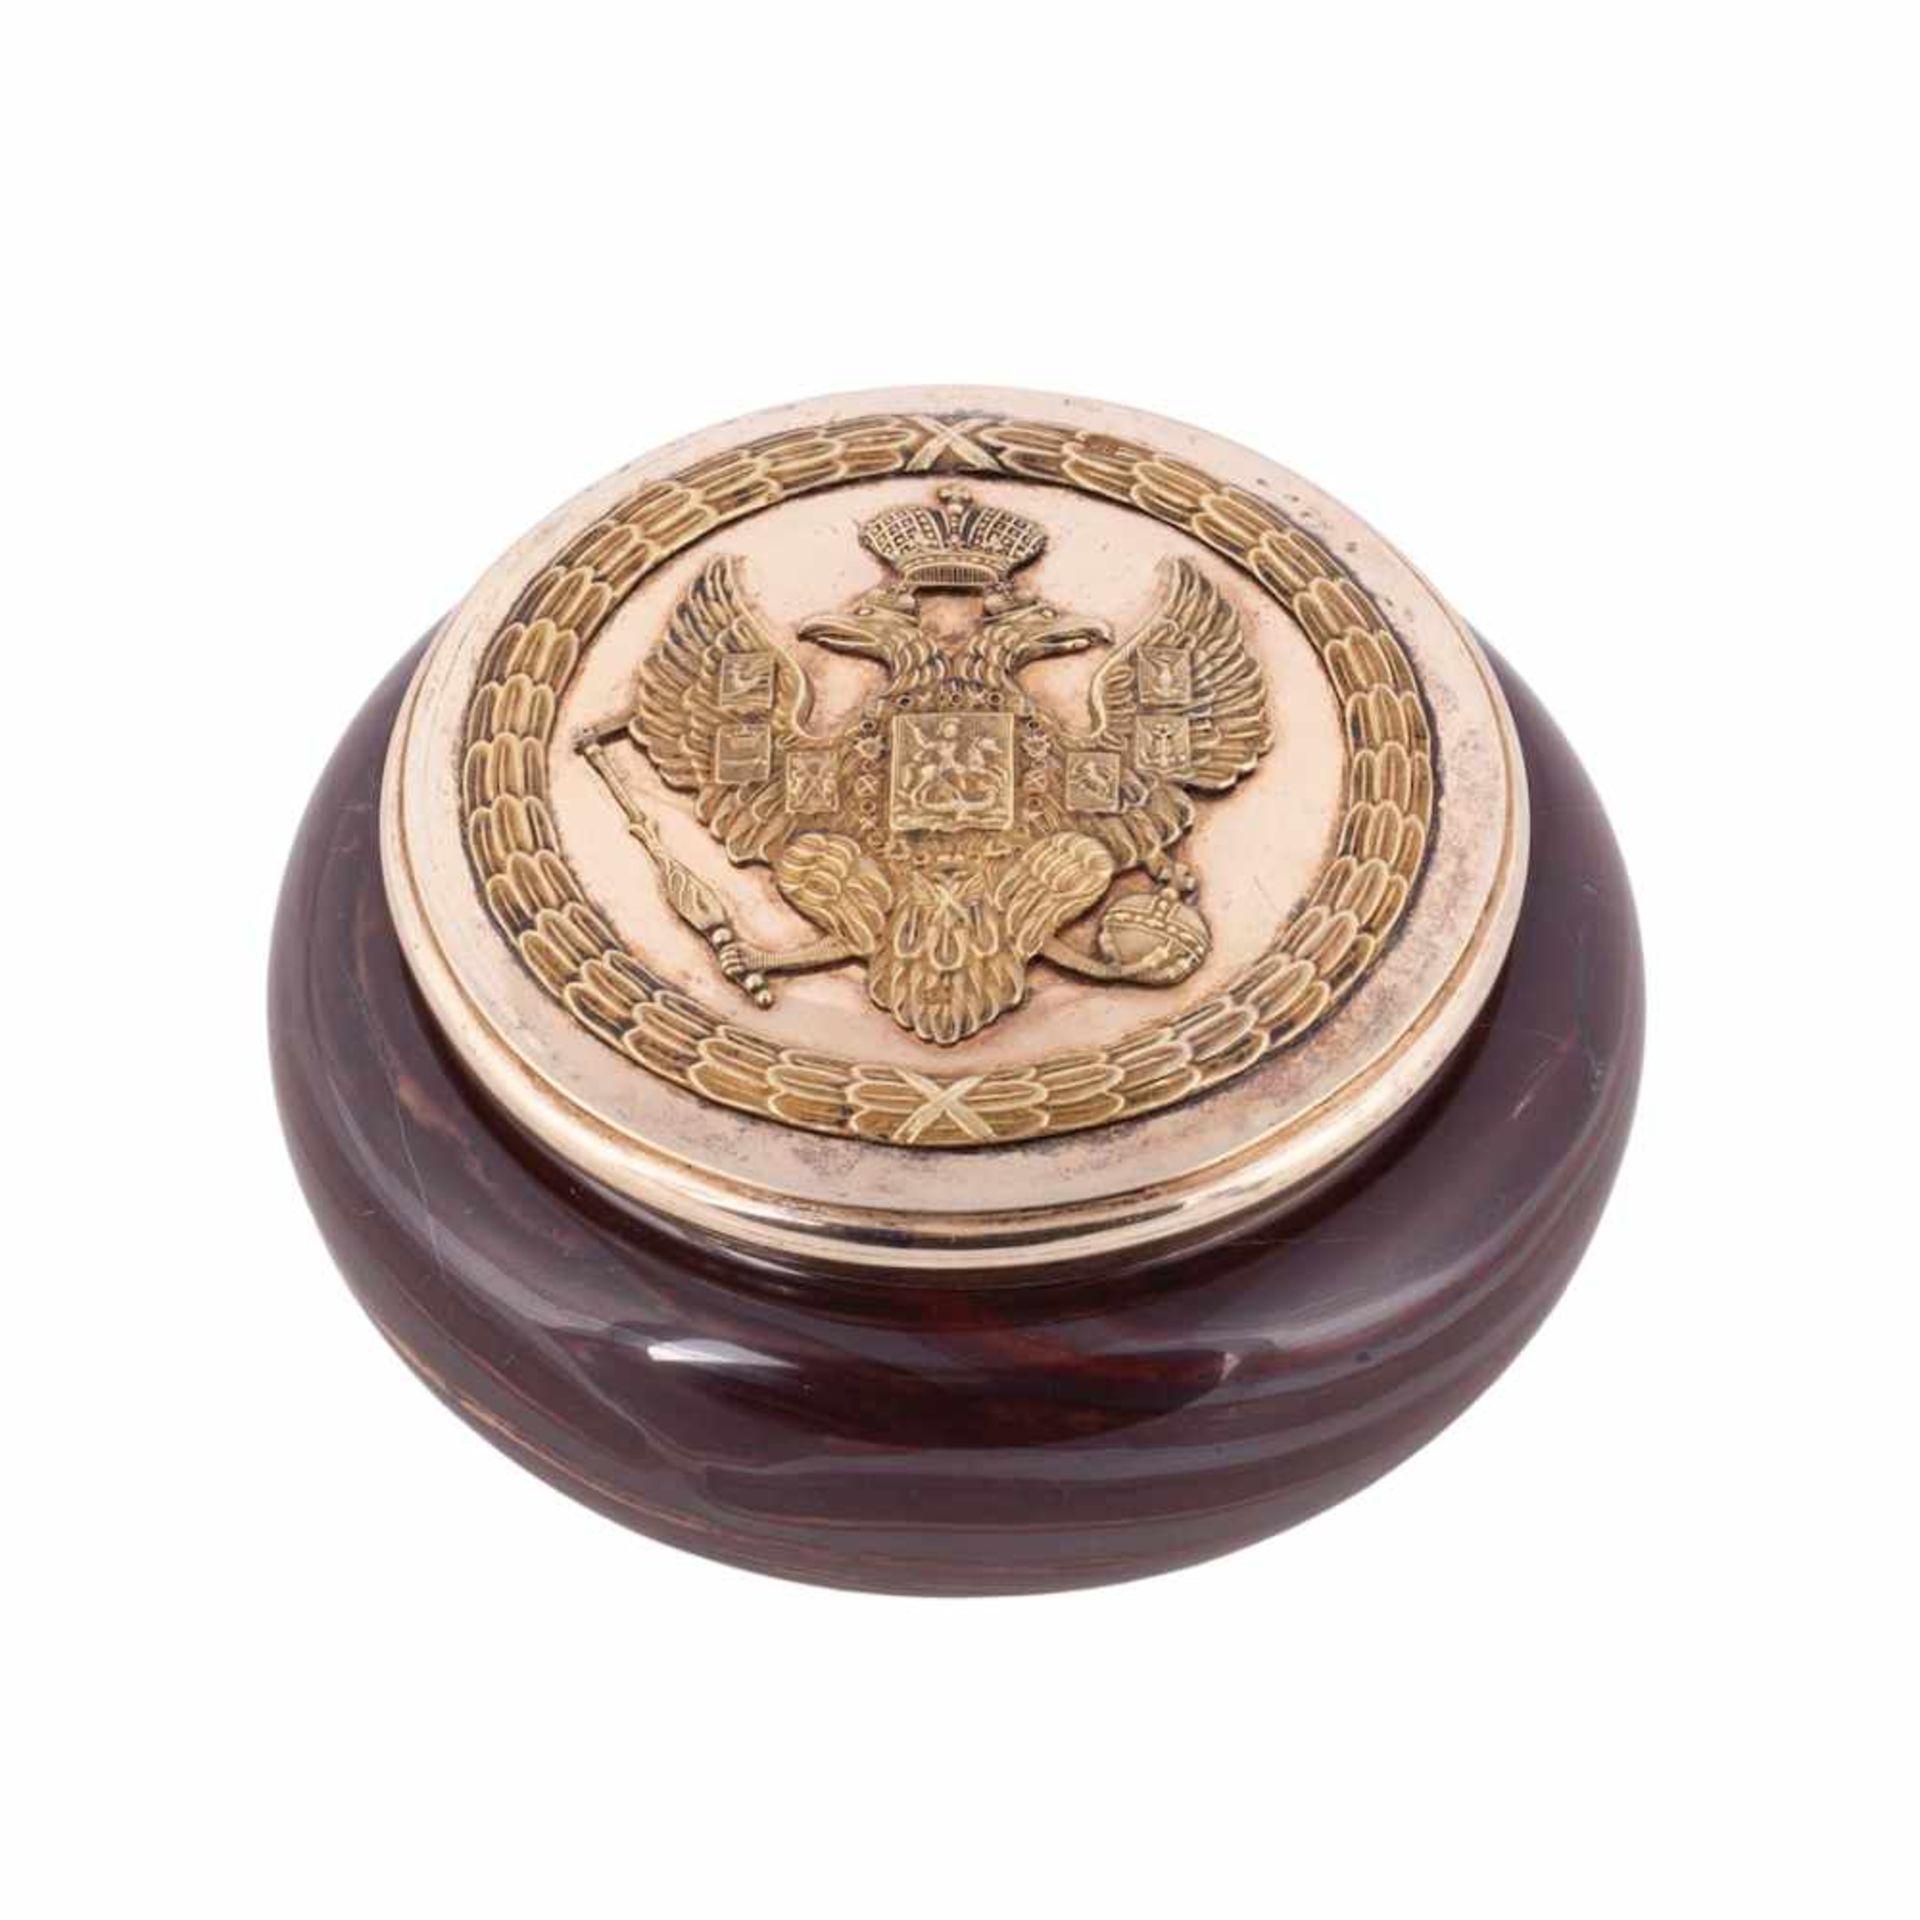 A Russian box with a double-headed eagle